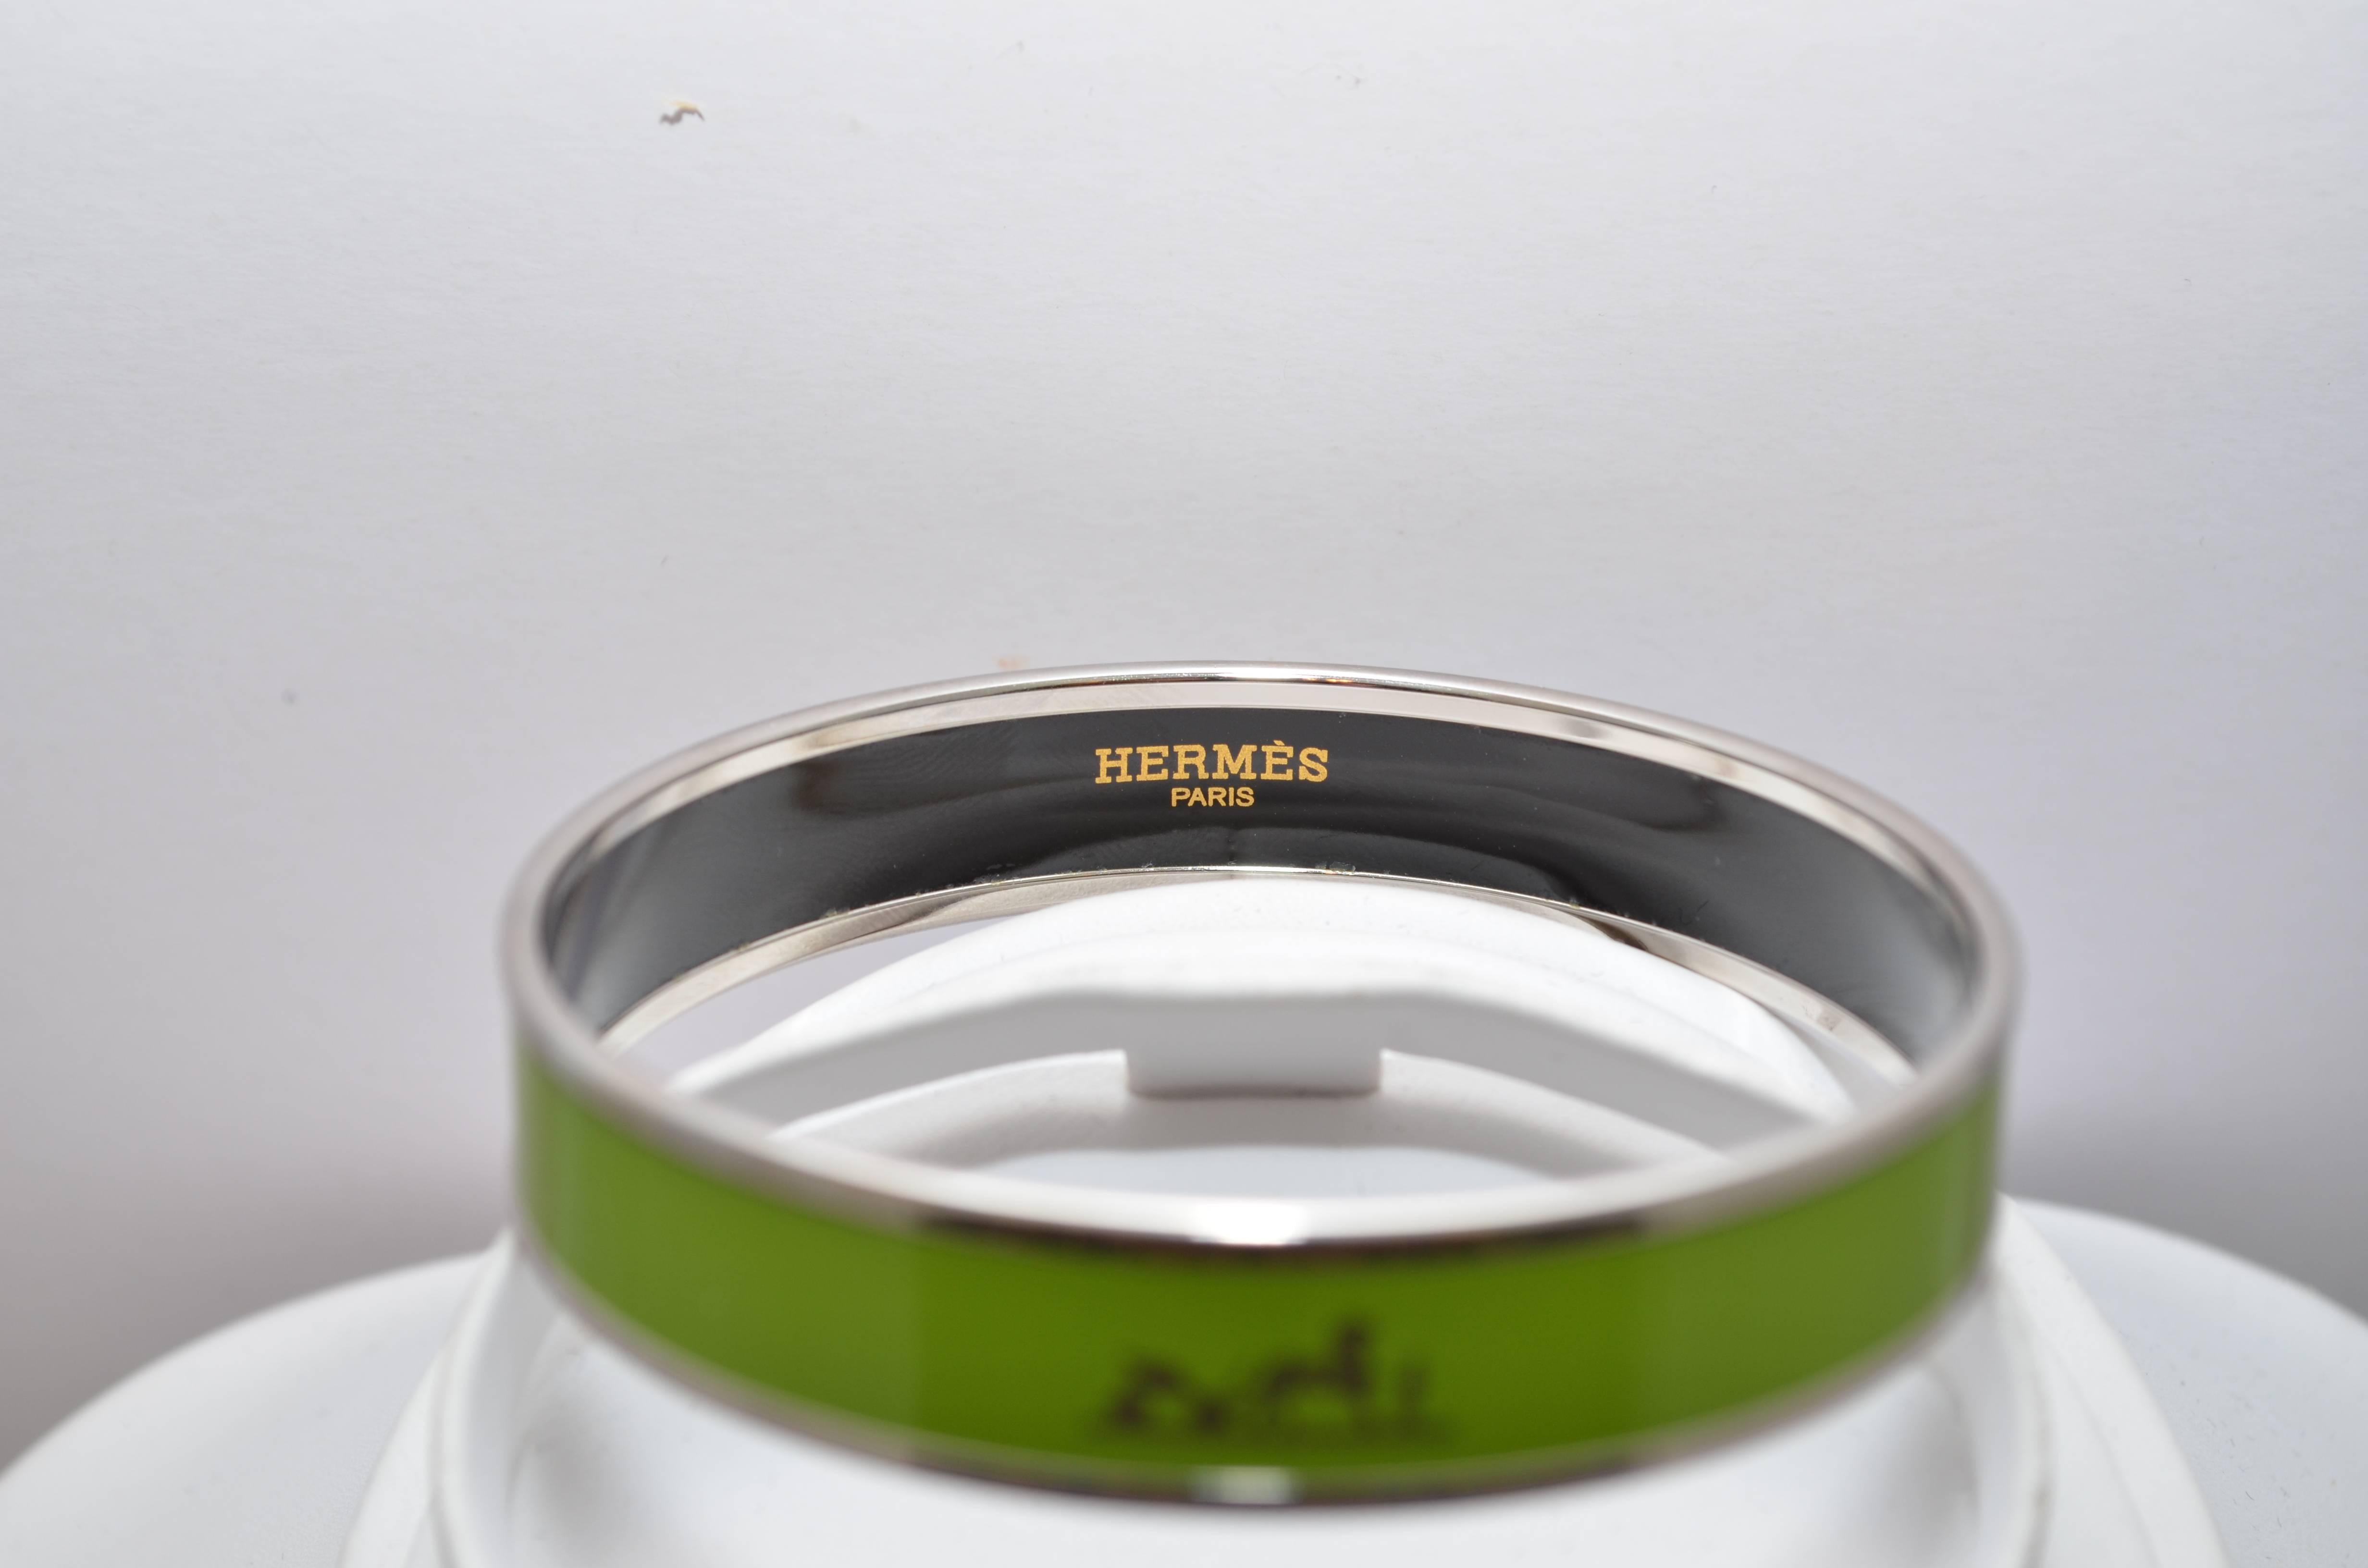 Hermes Paris Lime Green Enamel Equestrian Horse Print Logo Bangle Bracelet 62cm Small size Hermes Paris bangle in a lime green enamel with the horse logo in silver, and silver palladium plated metal. Diameter measures 2.5 inches and width is 1